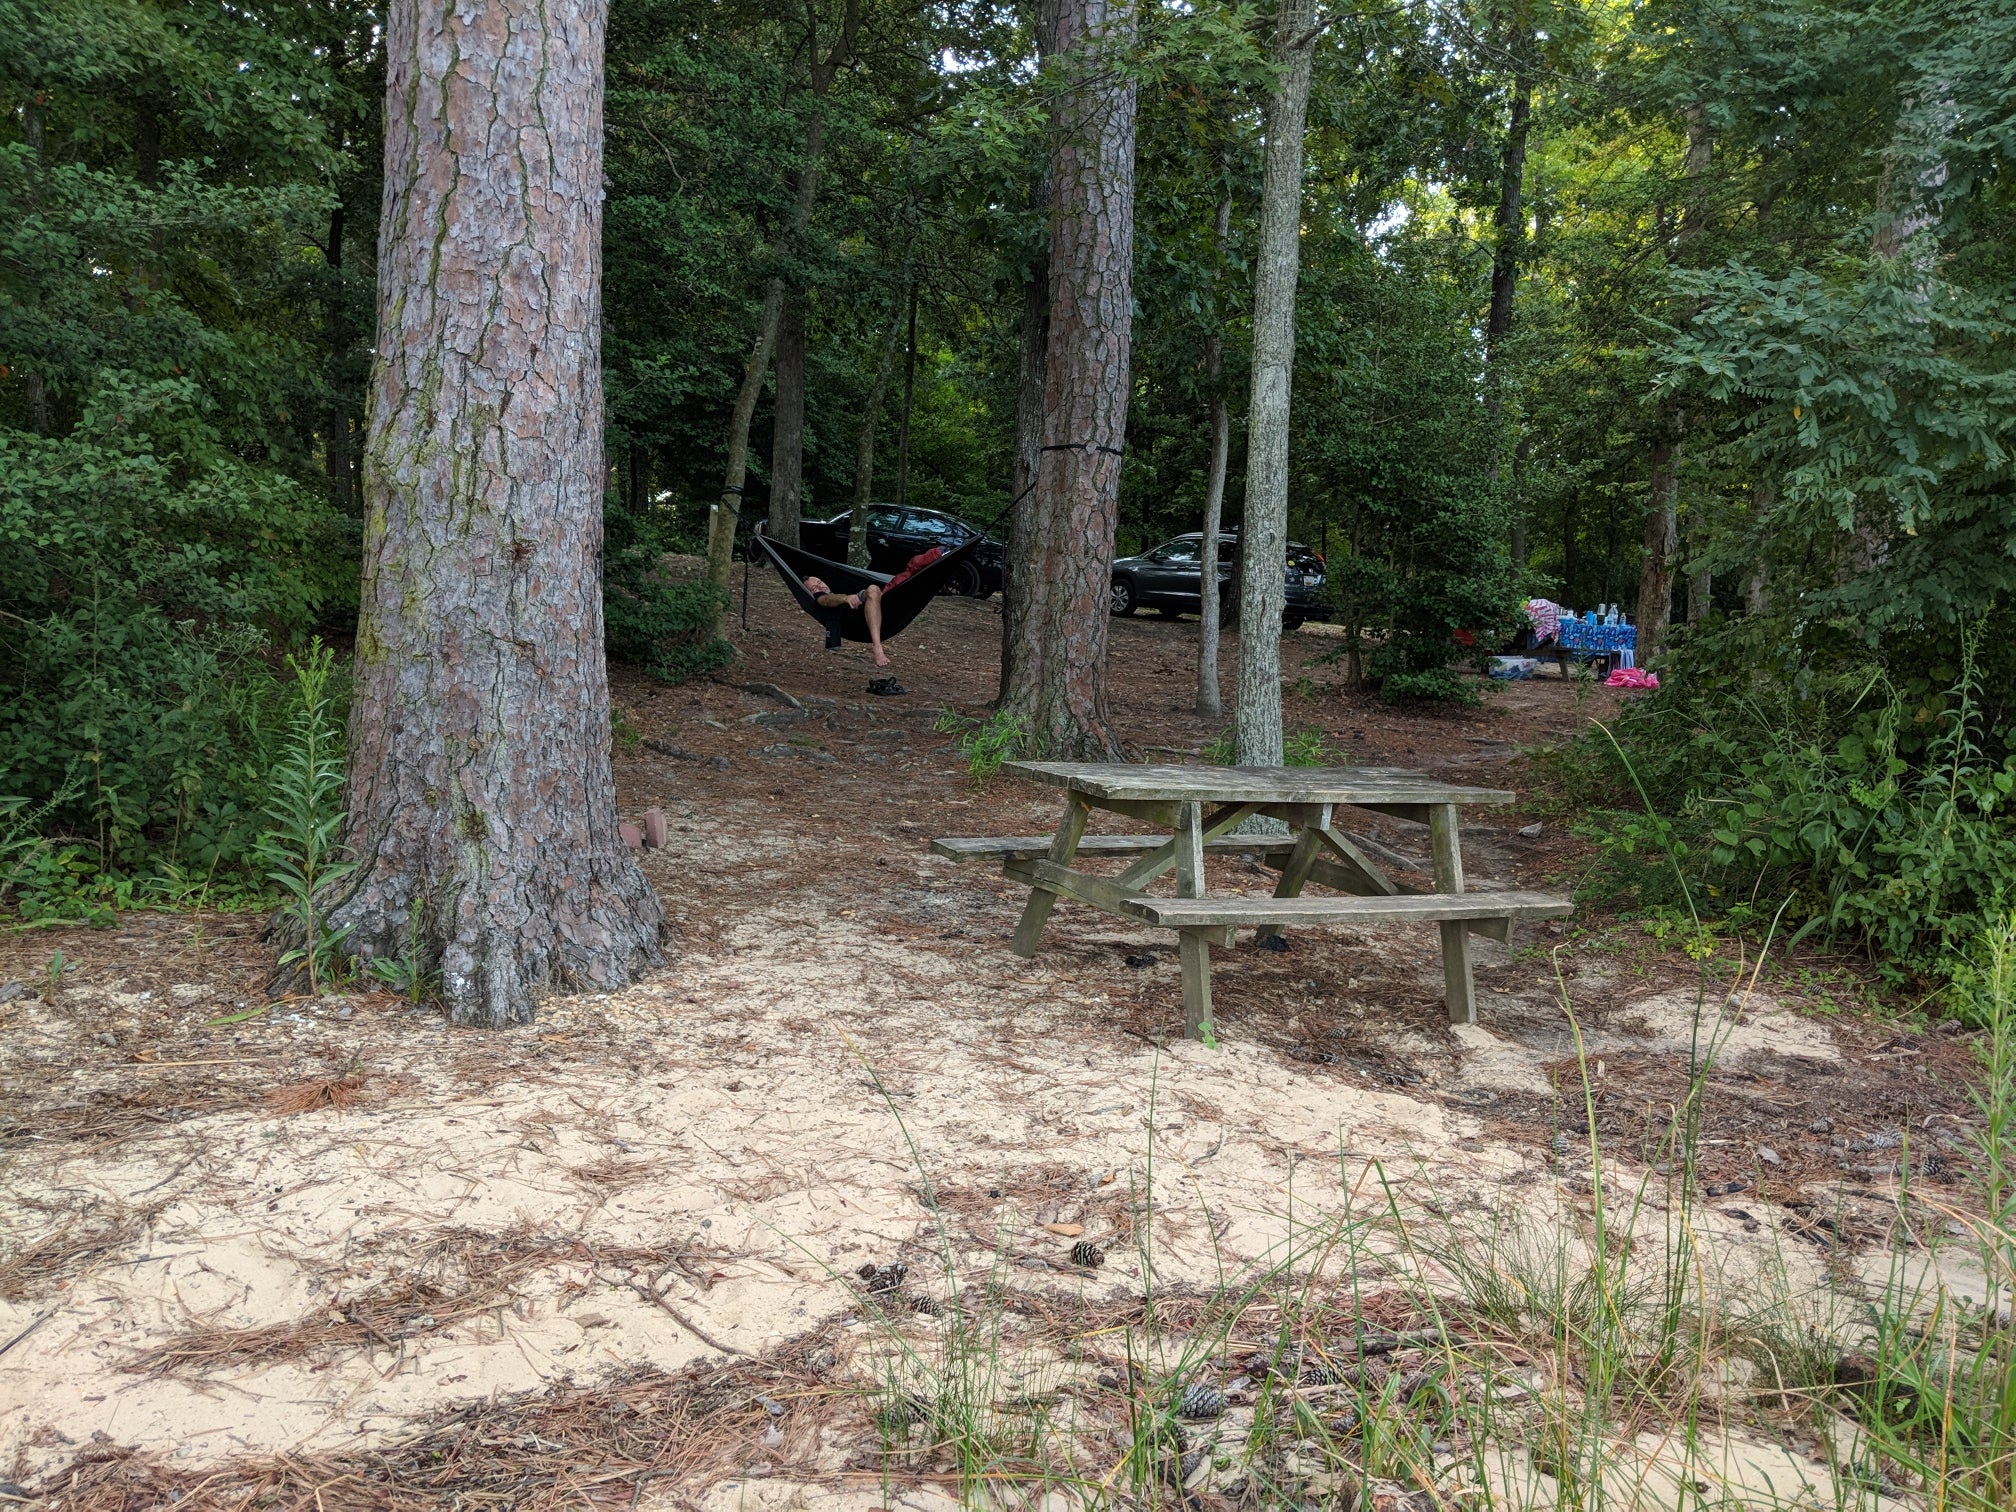 Camper submitted image from Chickahominy Riverfront Park - 4